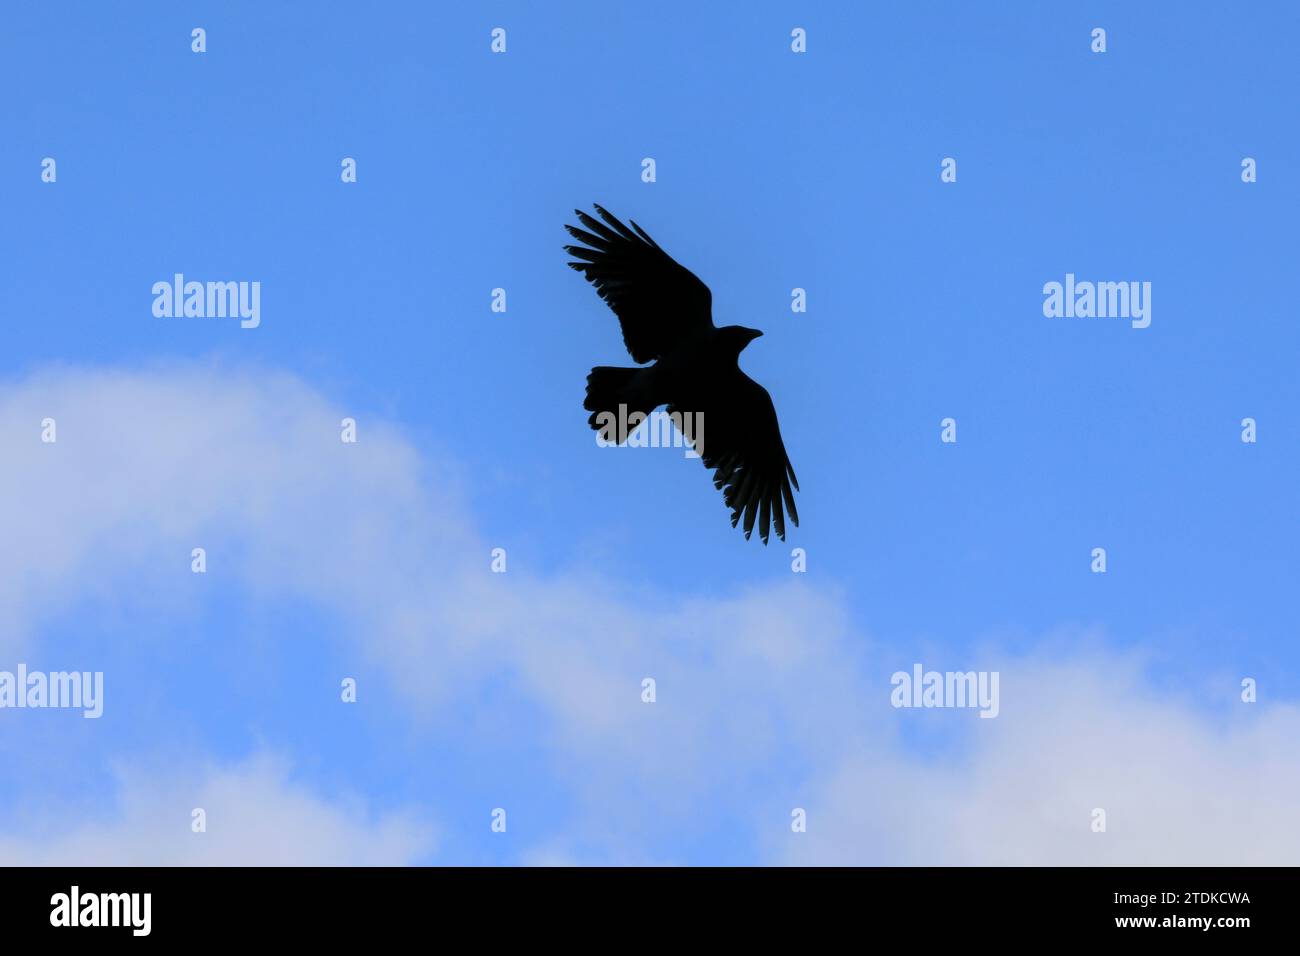 Crows Are Free 6. Hooded crow, Corvus cornix in flight against blue sky with white clouds. Stock Photo